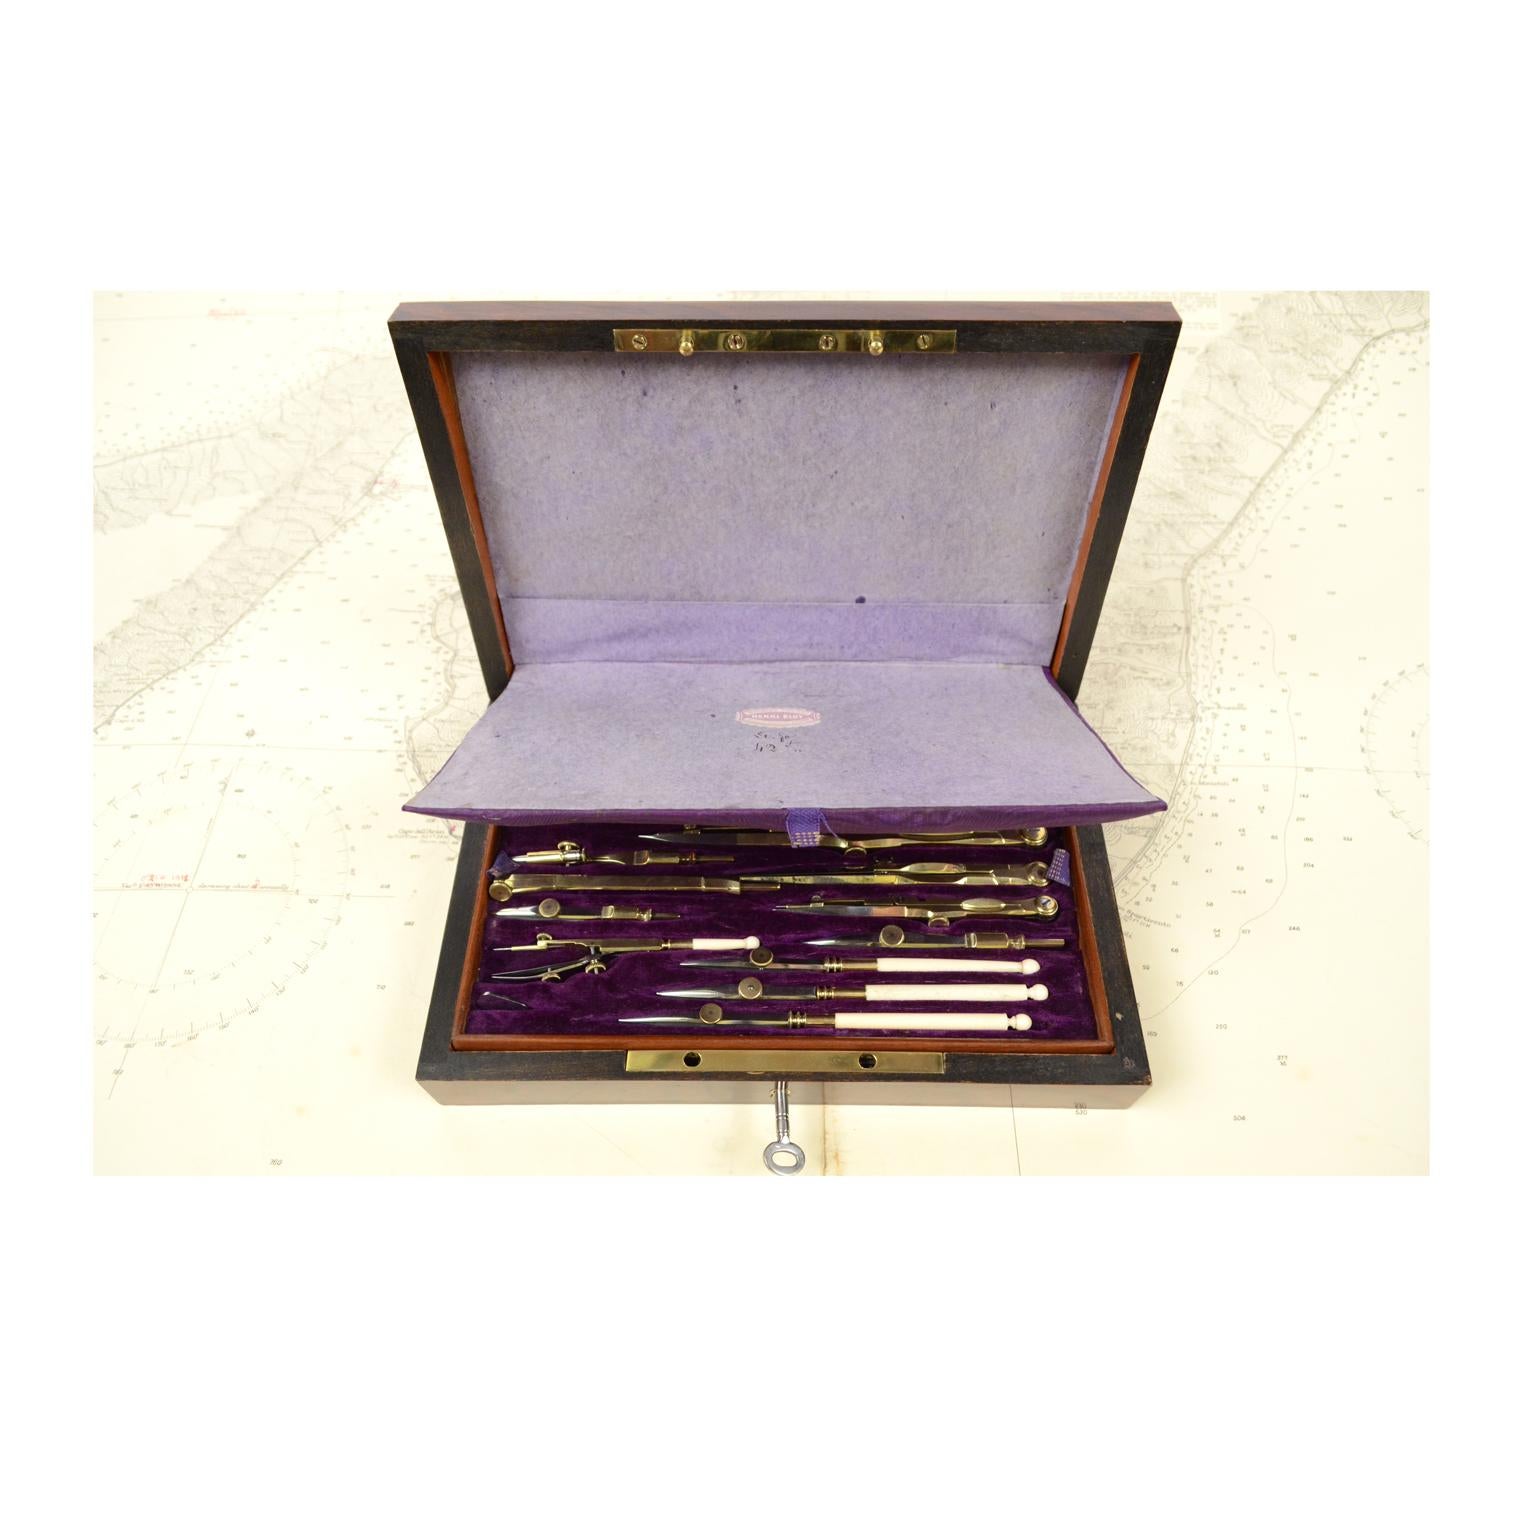 Elegant box of compasses made in the mid-19th century. Wooden box with brass hinges, complete with key. At the center of the lid there is a brass medallion diamond-shaped engraved with the name of the owner L. Lemire. Inside the box there are